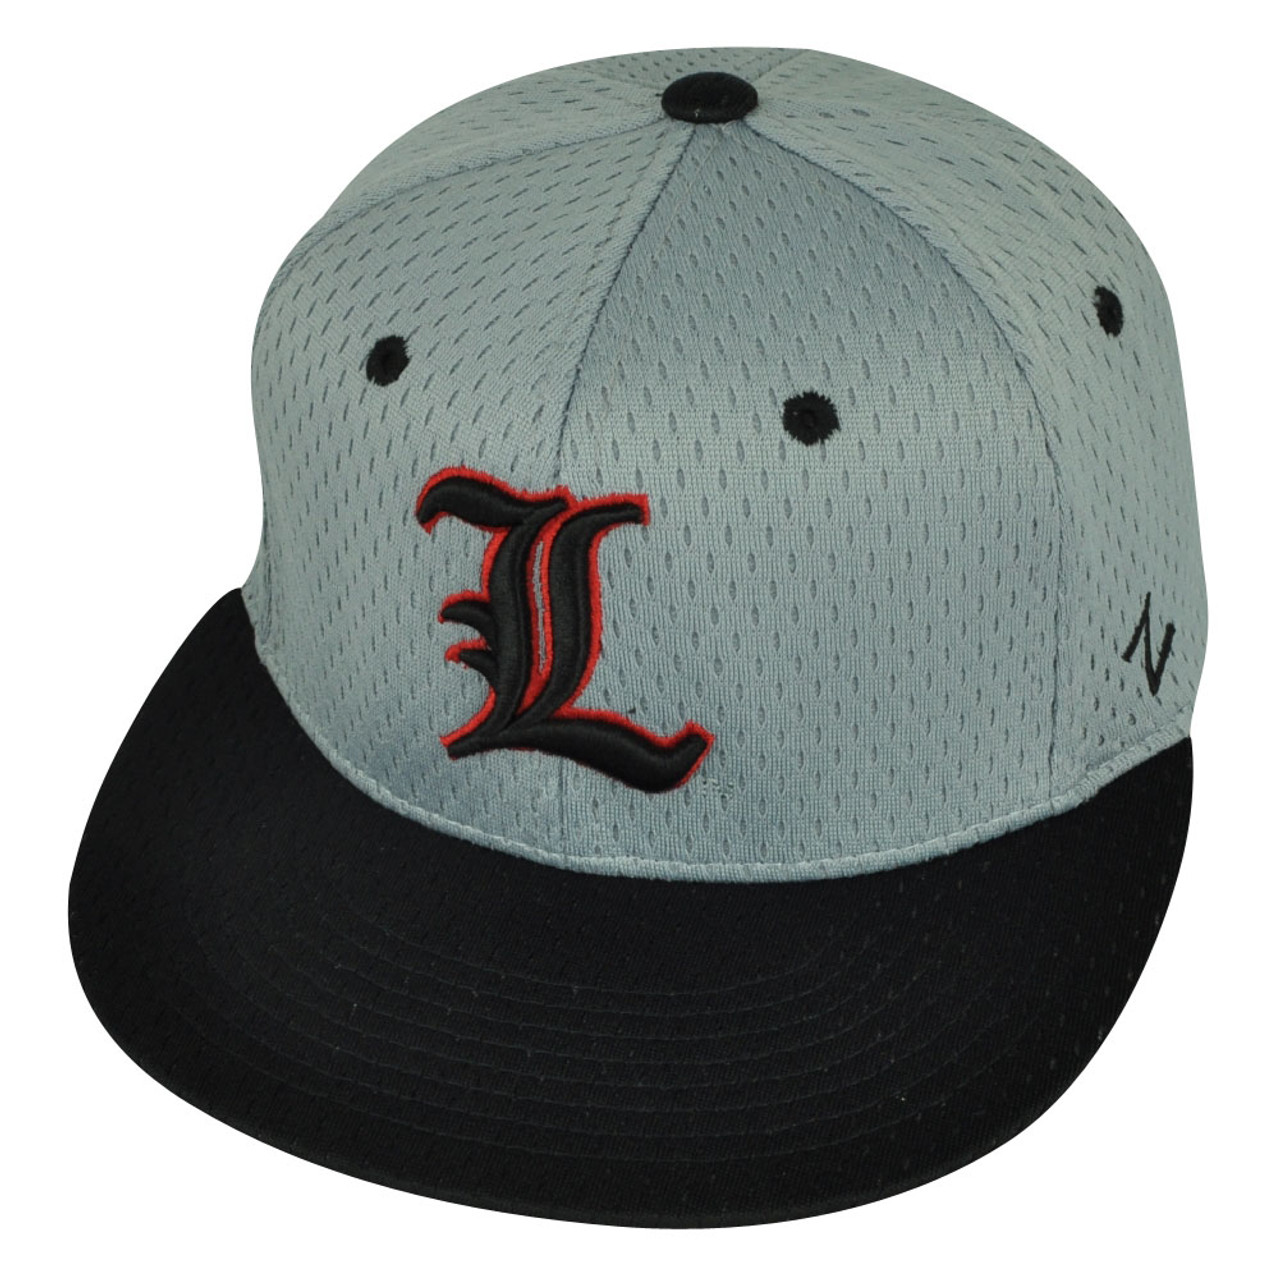 NCAA Louisville Cardinals Zephyr Flat Bill Hat Cap Grey Black Fitted Size  Small